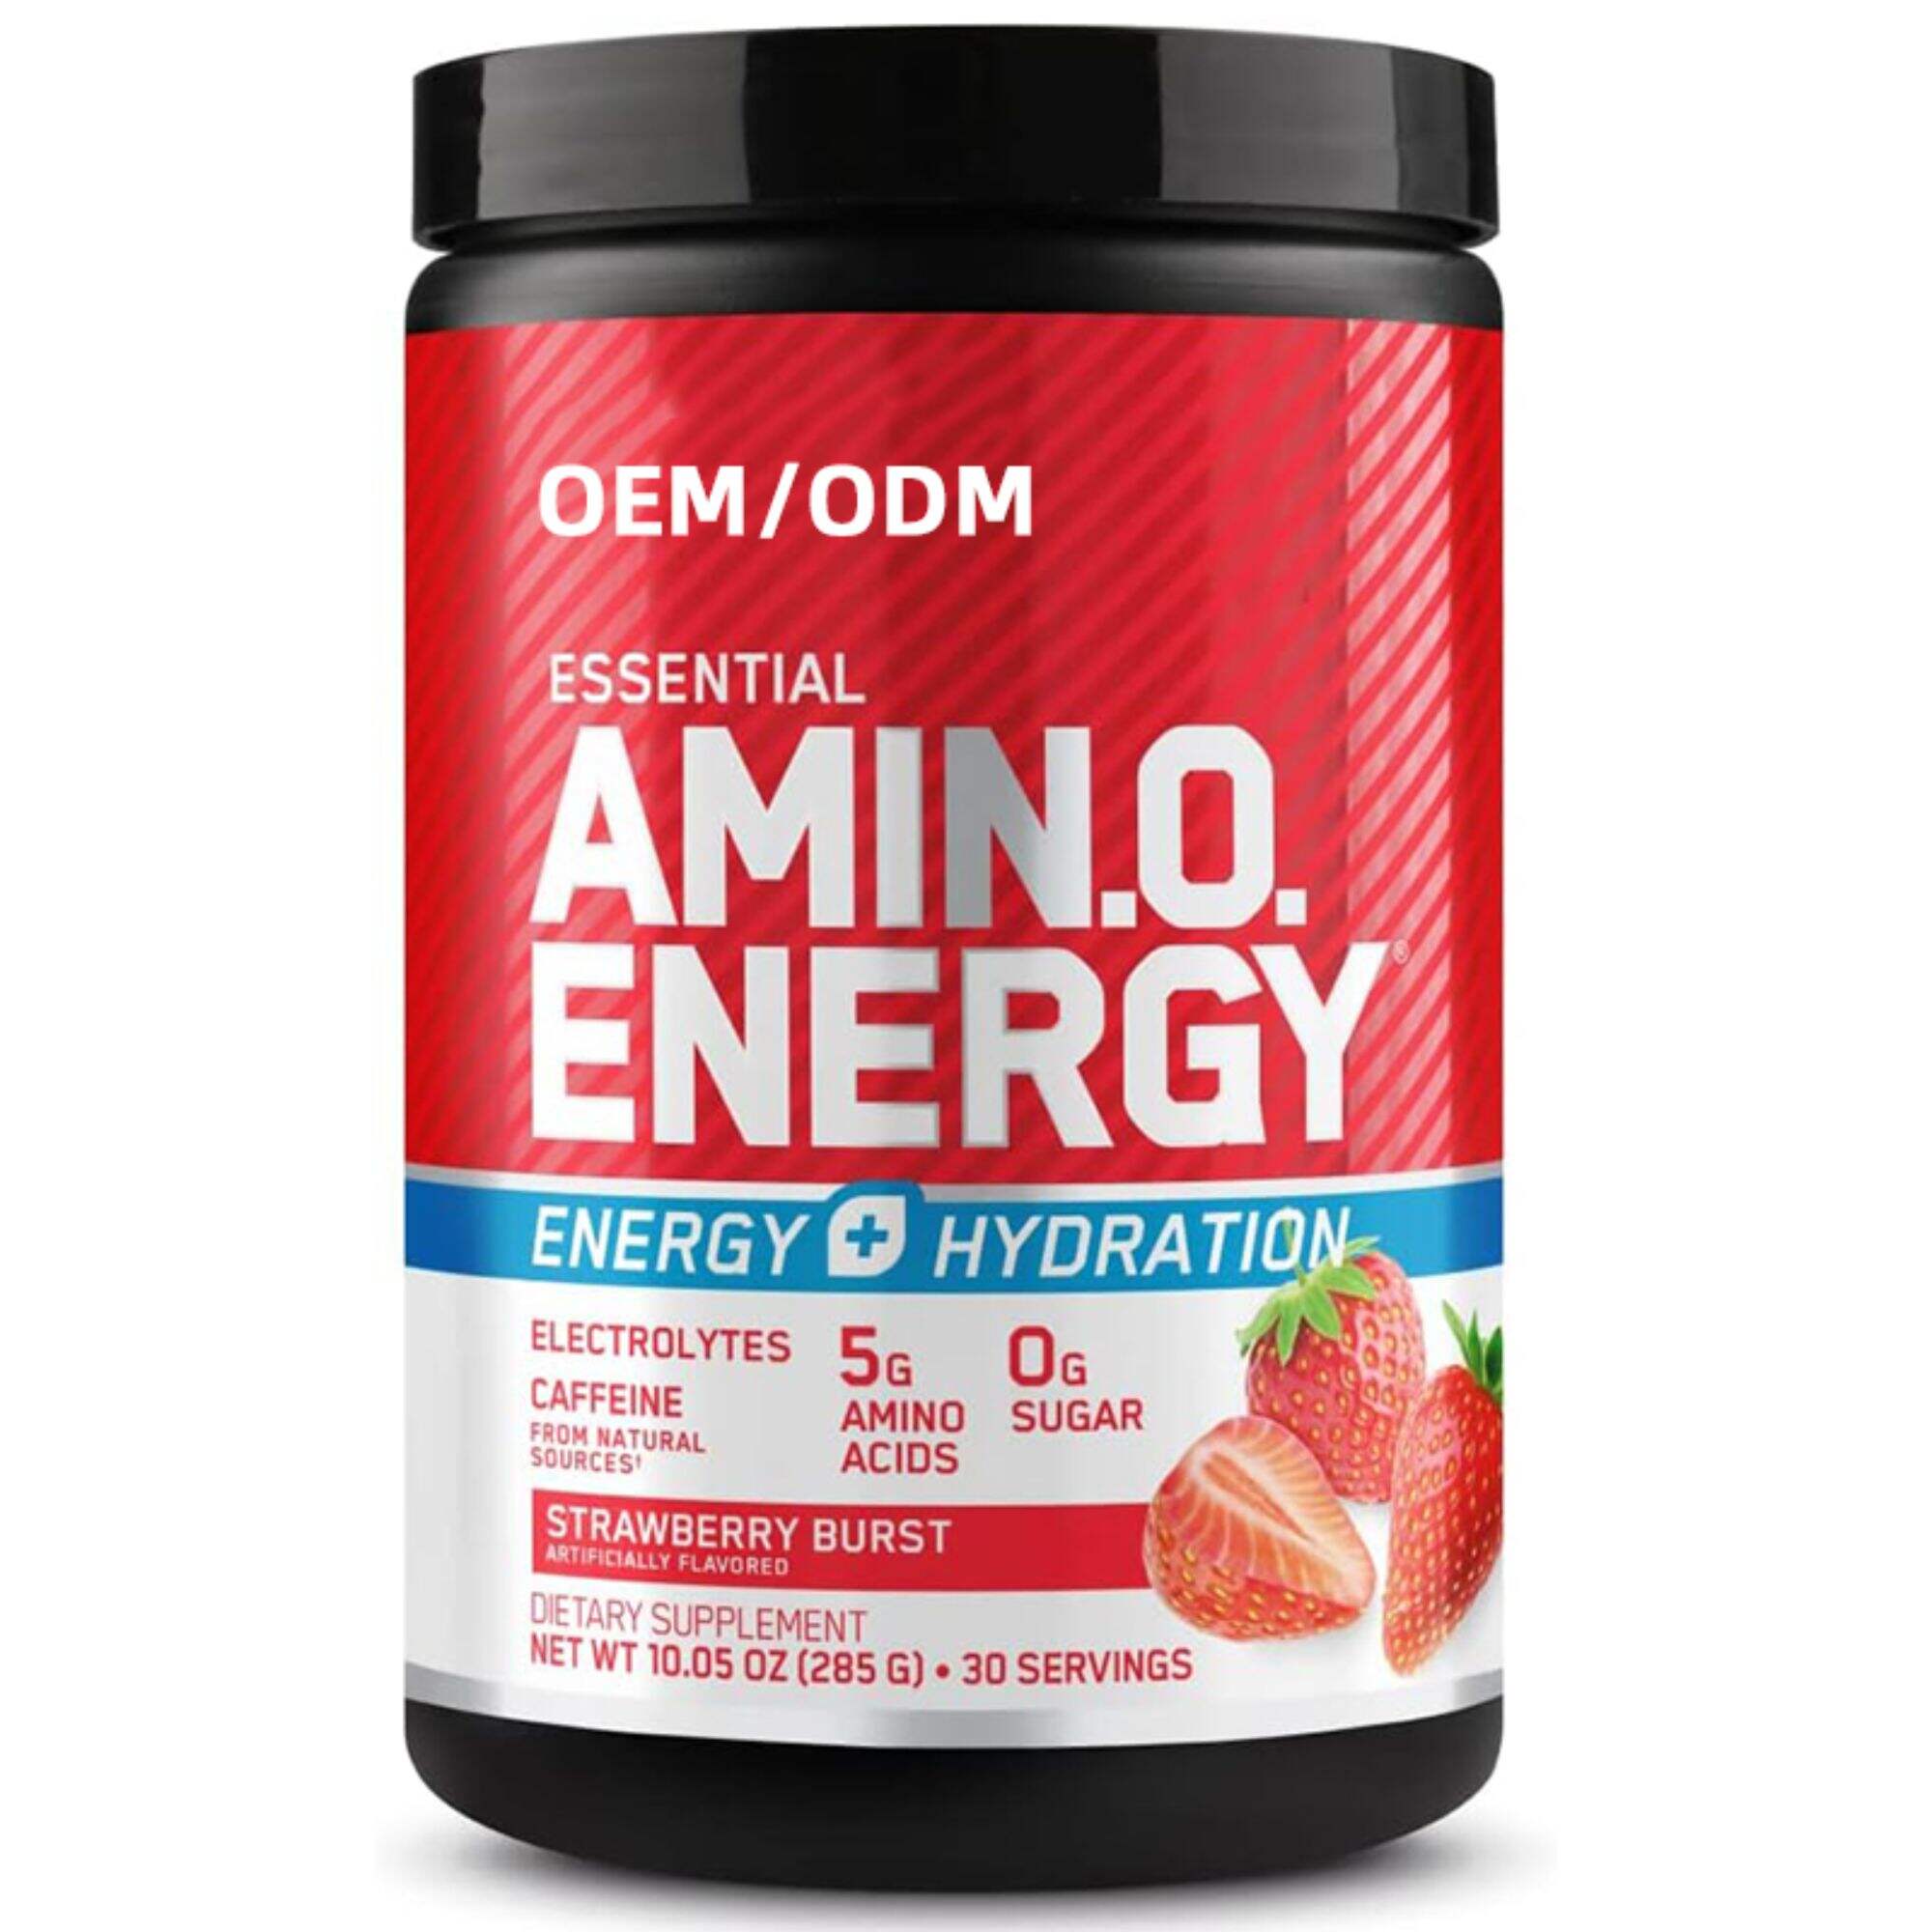 Amino Energy Plus Electrolytes Energy Drink Powder, Caffeine for Pre-Workout Energy and Amino Acids/BCAAs, Strawberry Burst, 10.5 Ounces (30 Servings), Pink